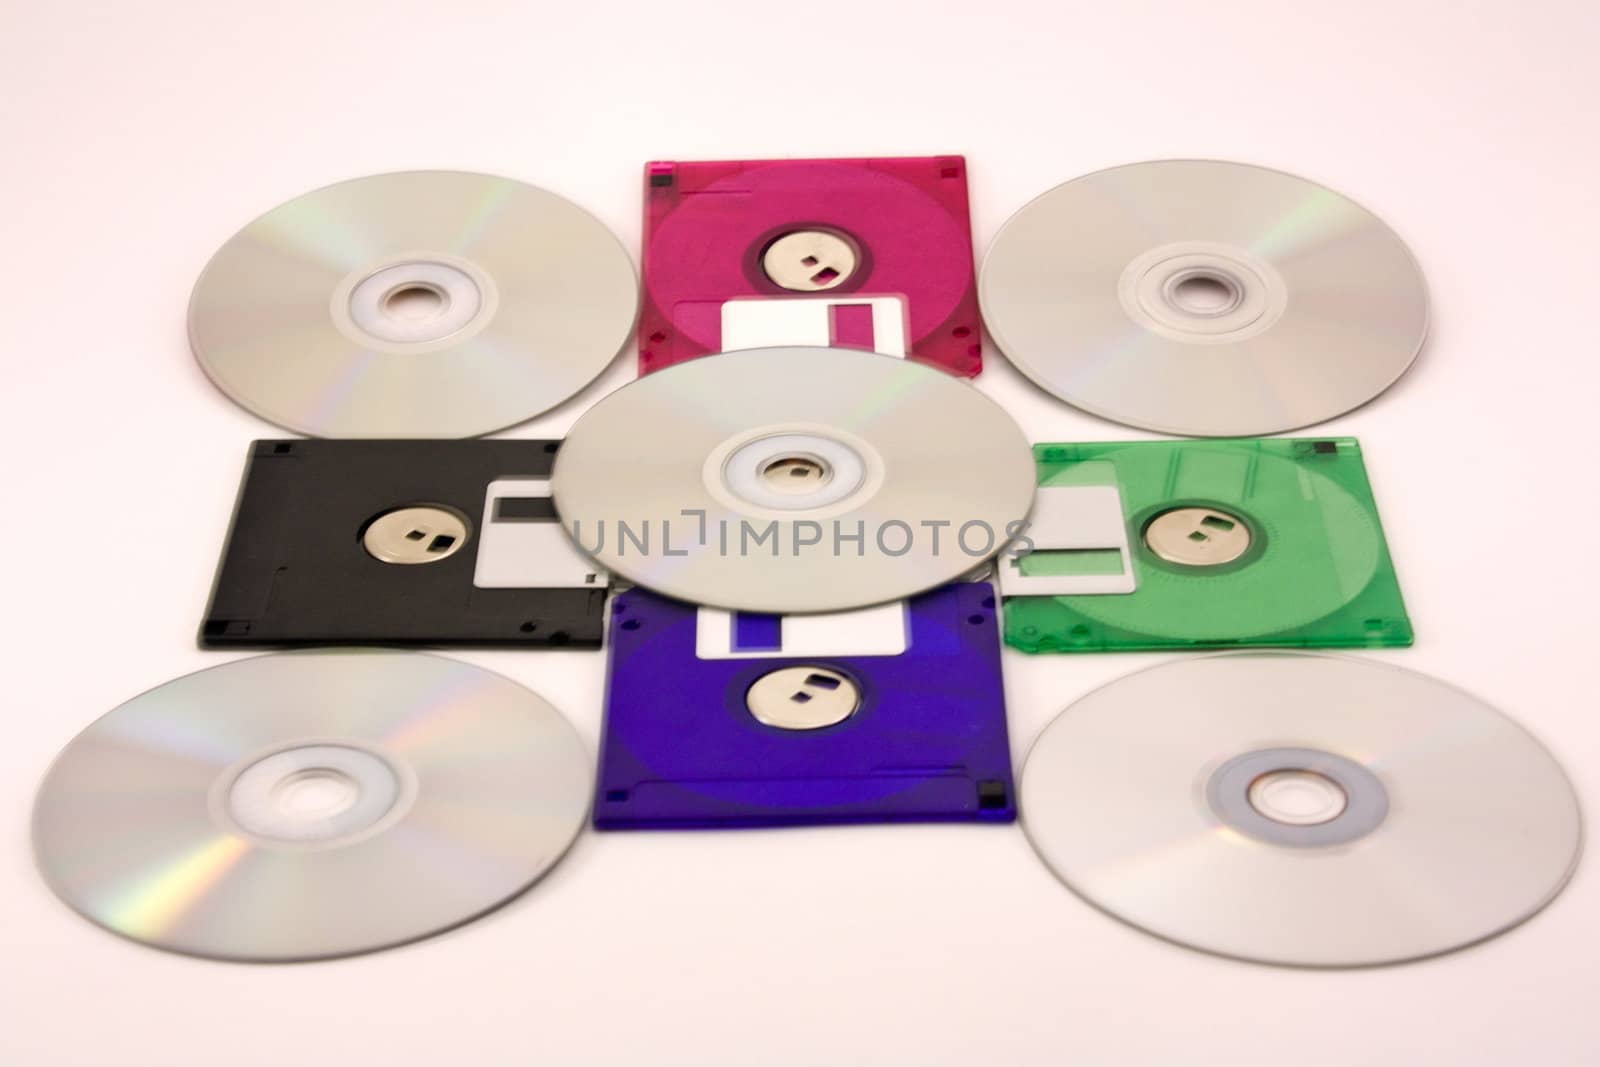 floppy disks and a cd isolated on white background